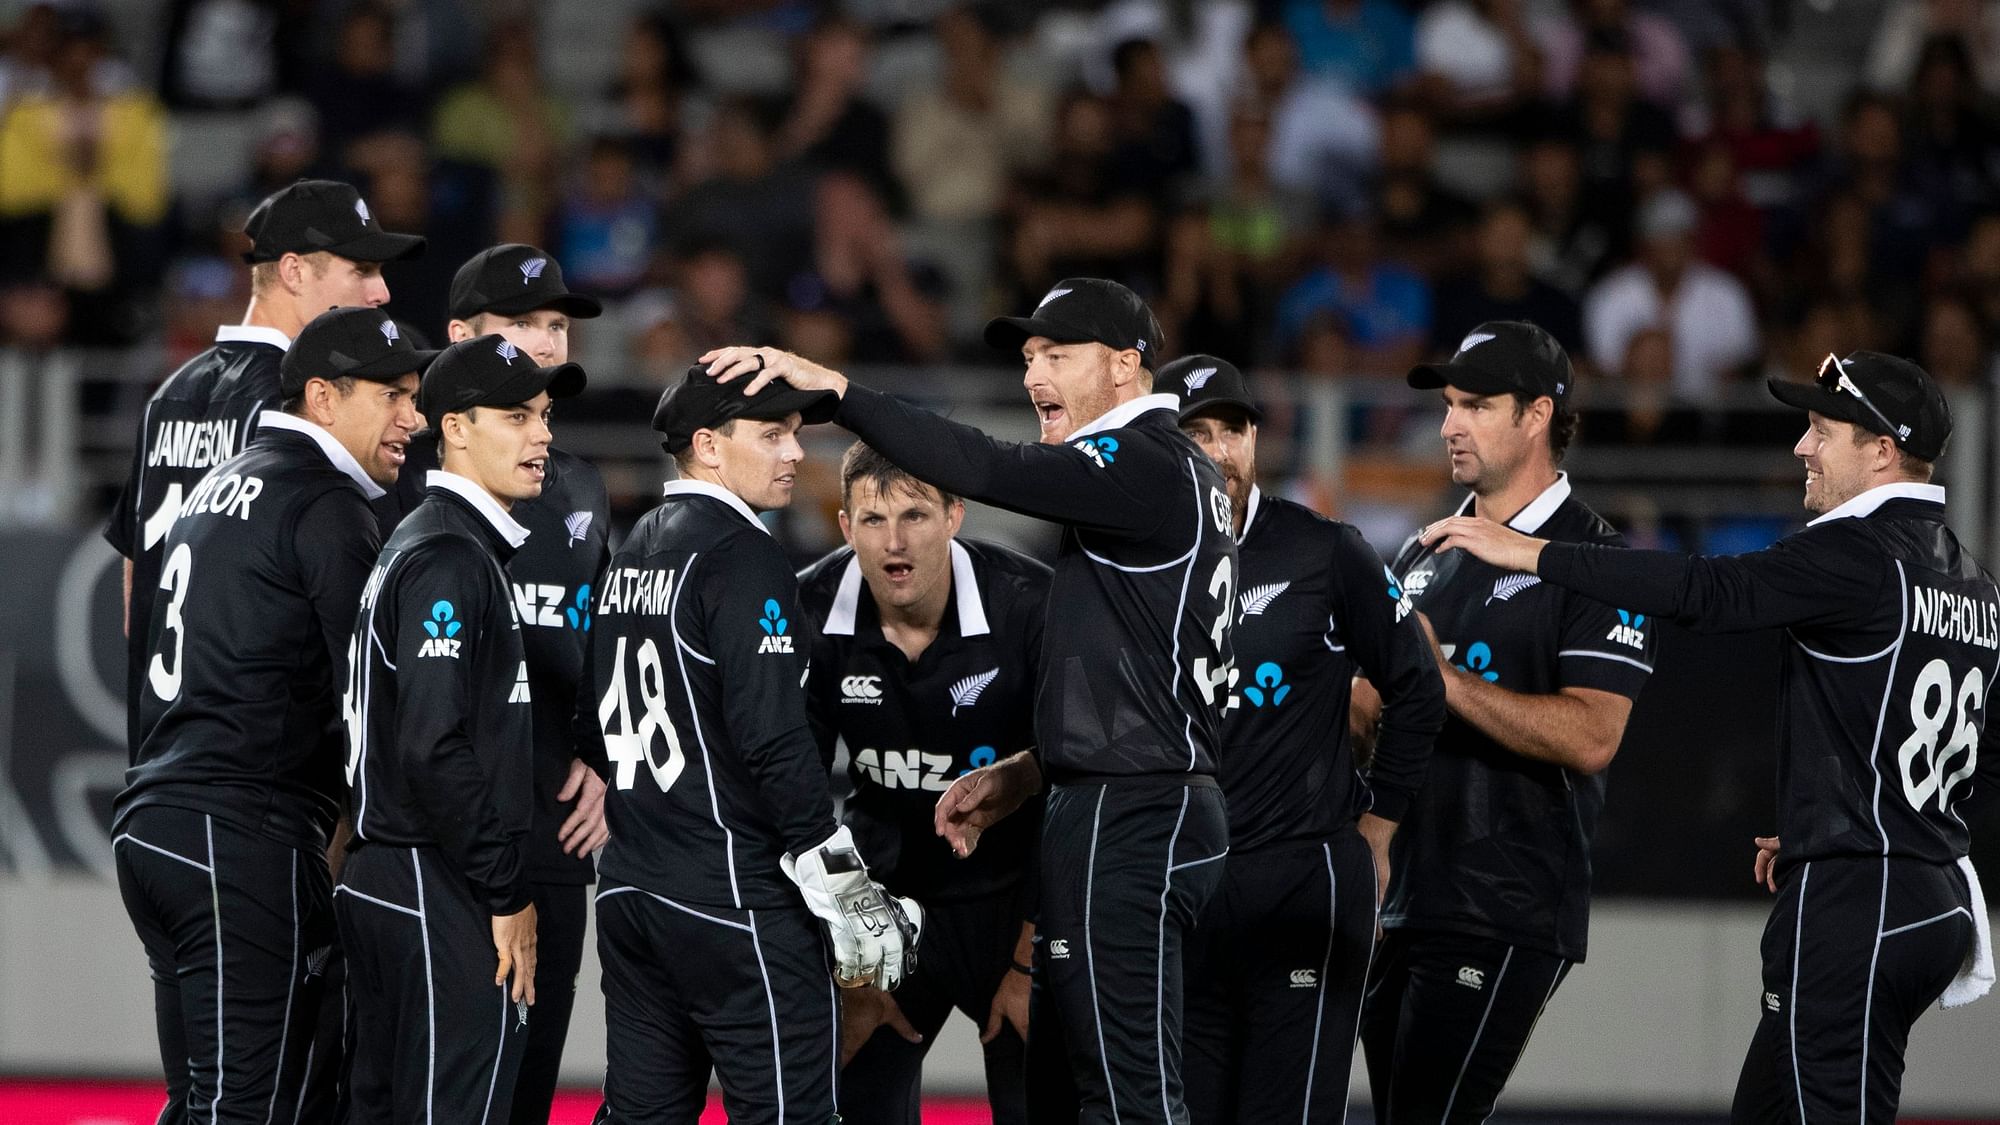 Stats and records from the second ODI between India and New Zealand at Auckland.